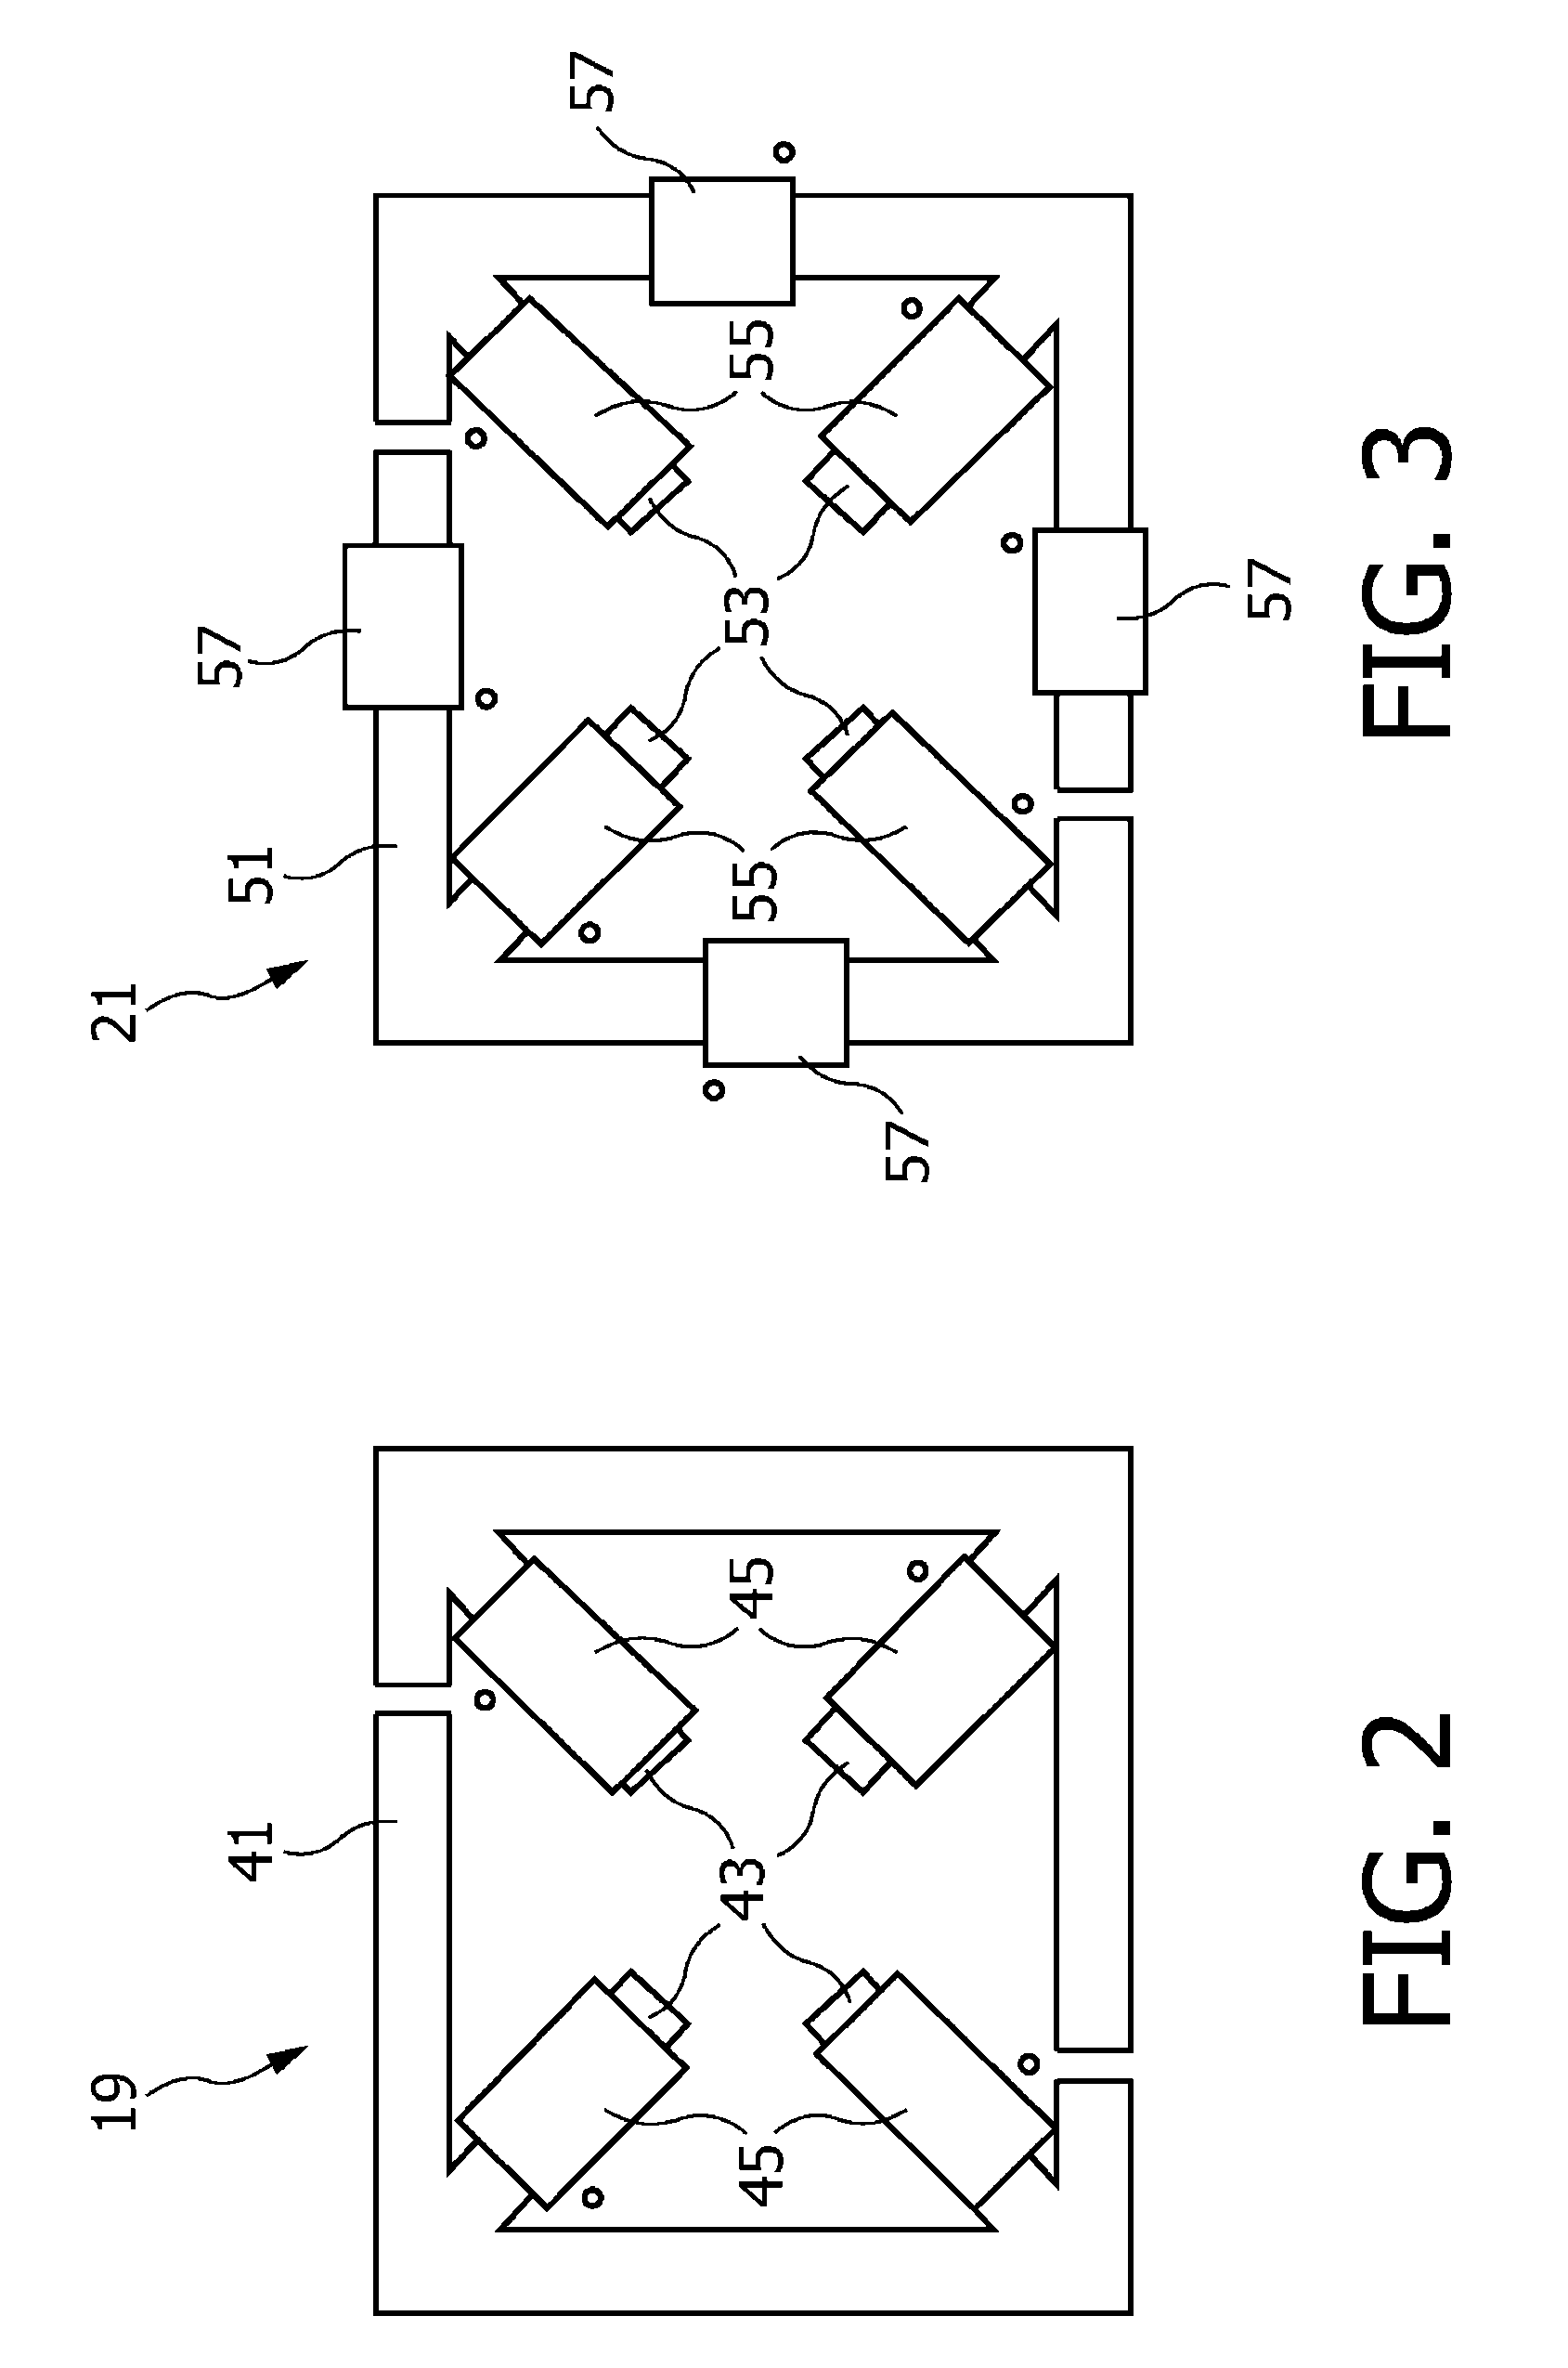 Electron optical apparatus, X-ray emitting device and method of producing an electron beam